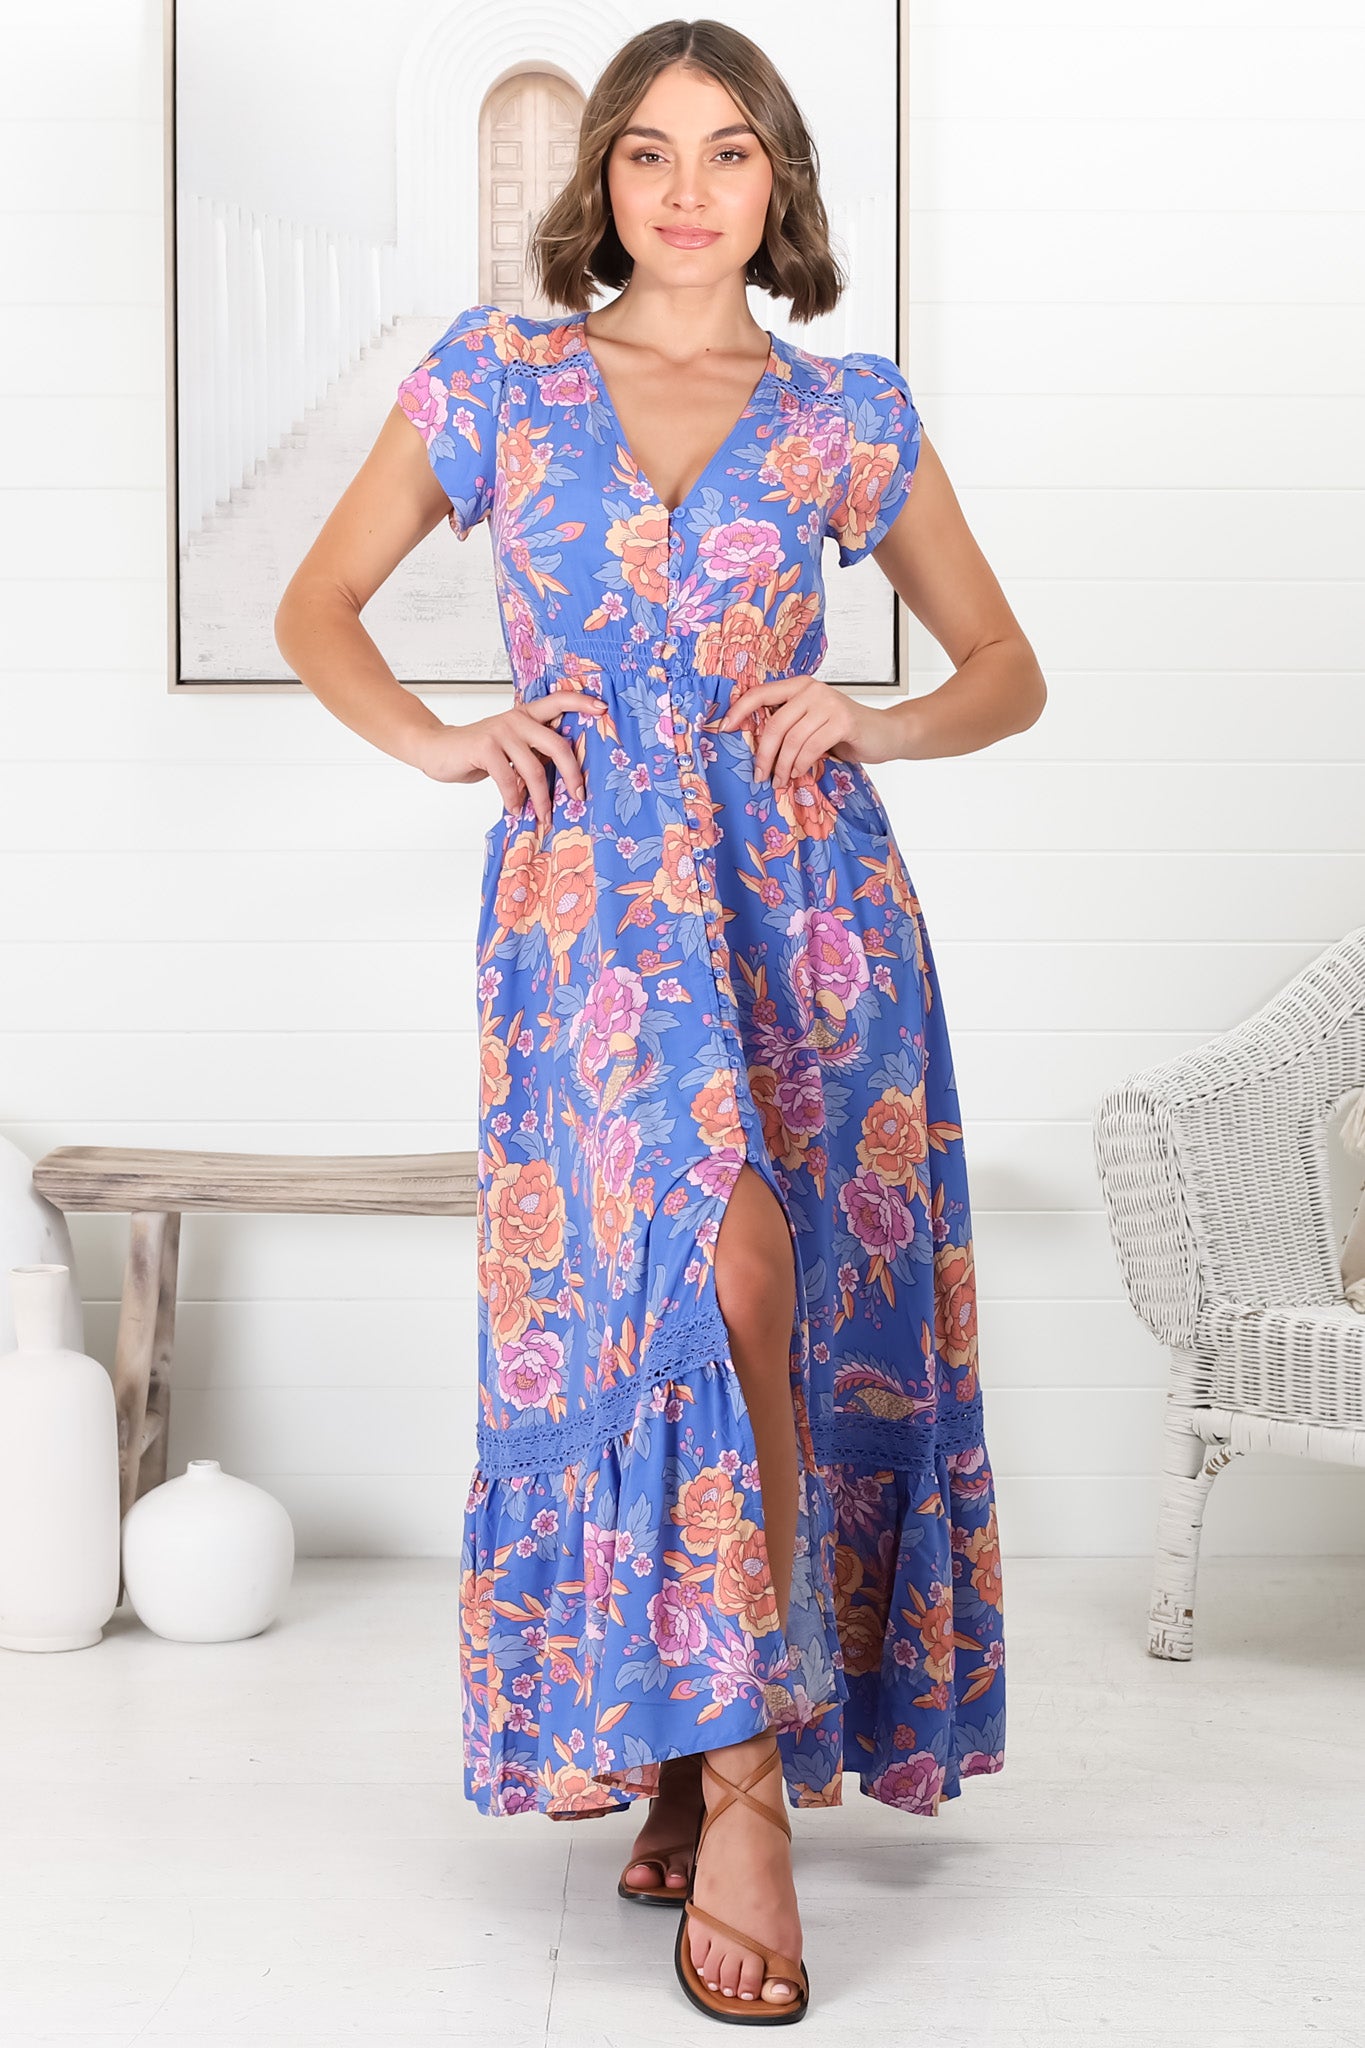 JAASE - Carmen Maxi Dress: Butterfly Cap Sleeve Button Down A Line Dress with Lace Trim in Glastonbury Print